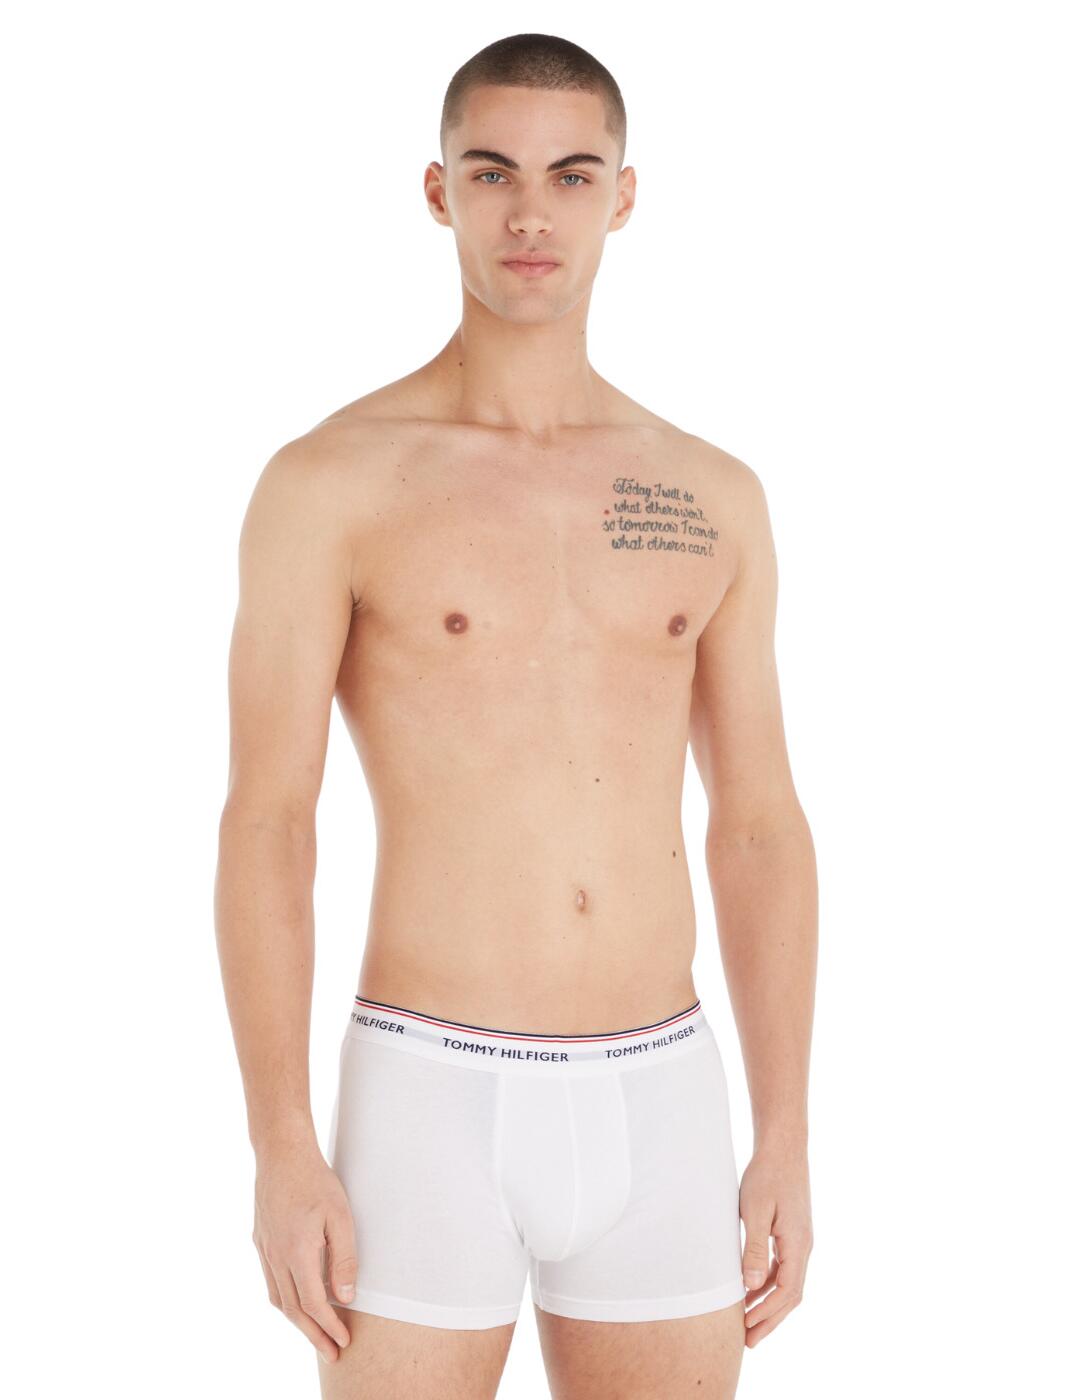 3-Pack Essential Boxer Briefs Tommy - black, grey and white - Tommy